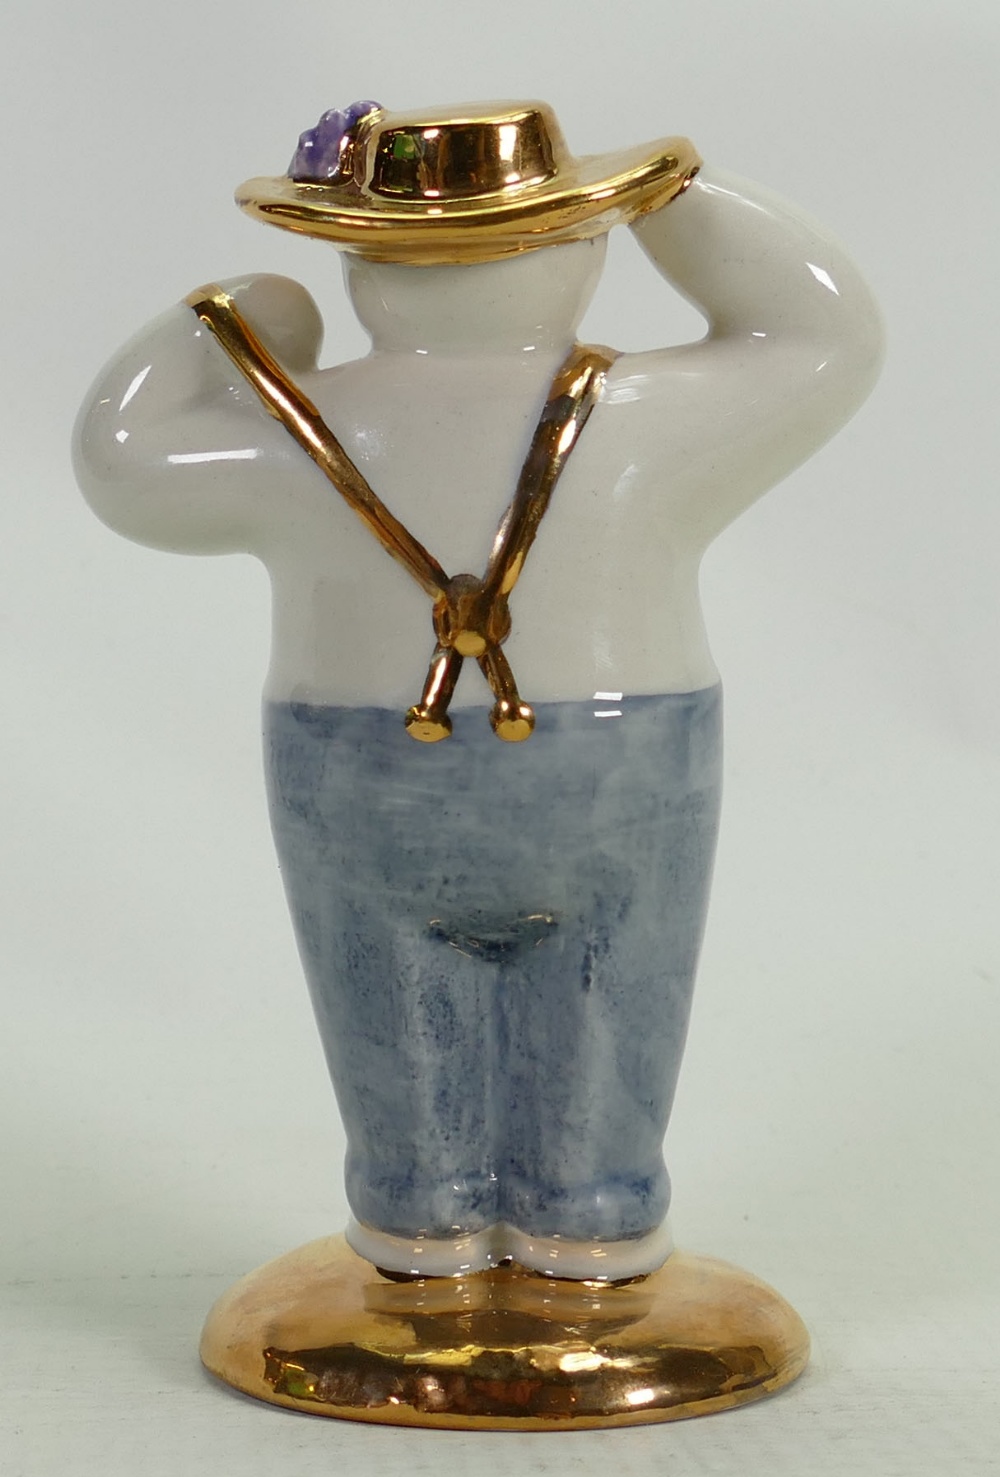 Royal Doulton Snowman prototype figure Stylish: In a different colourway with gold highlights, - Image 3 of 3